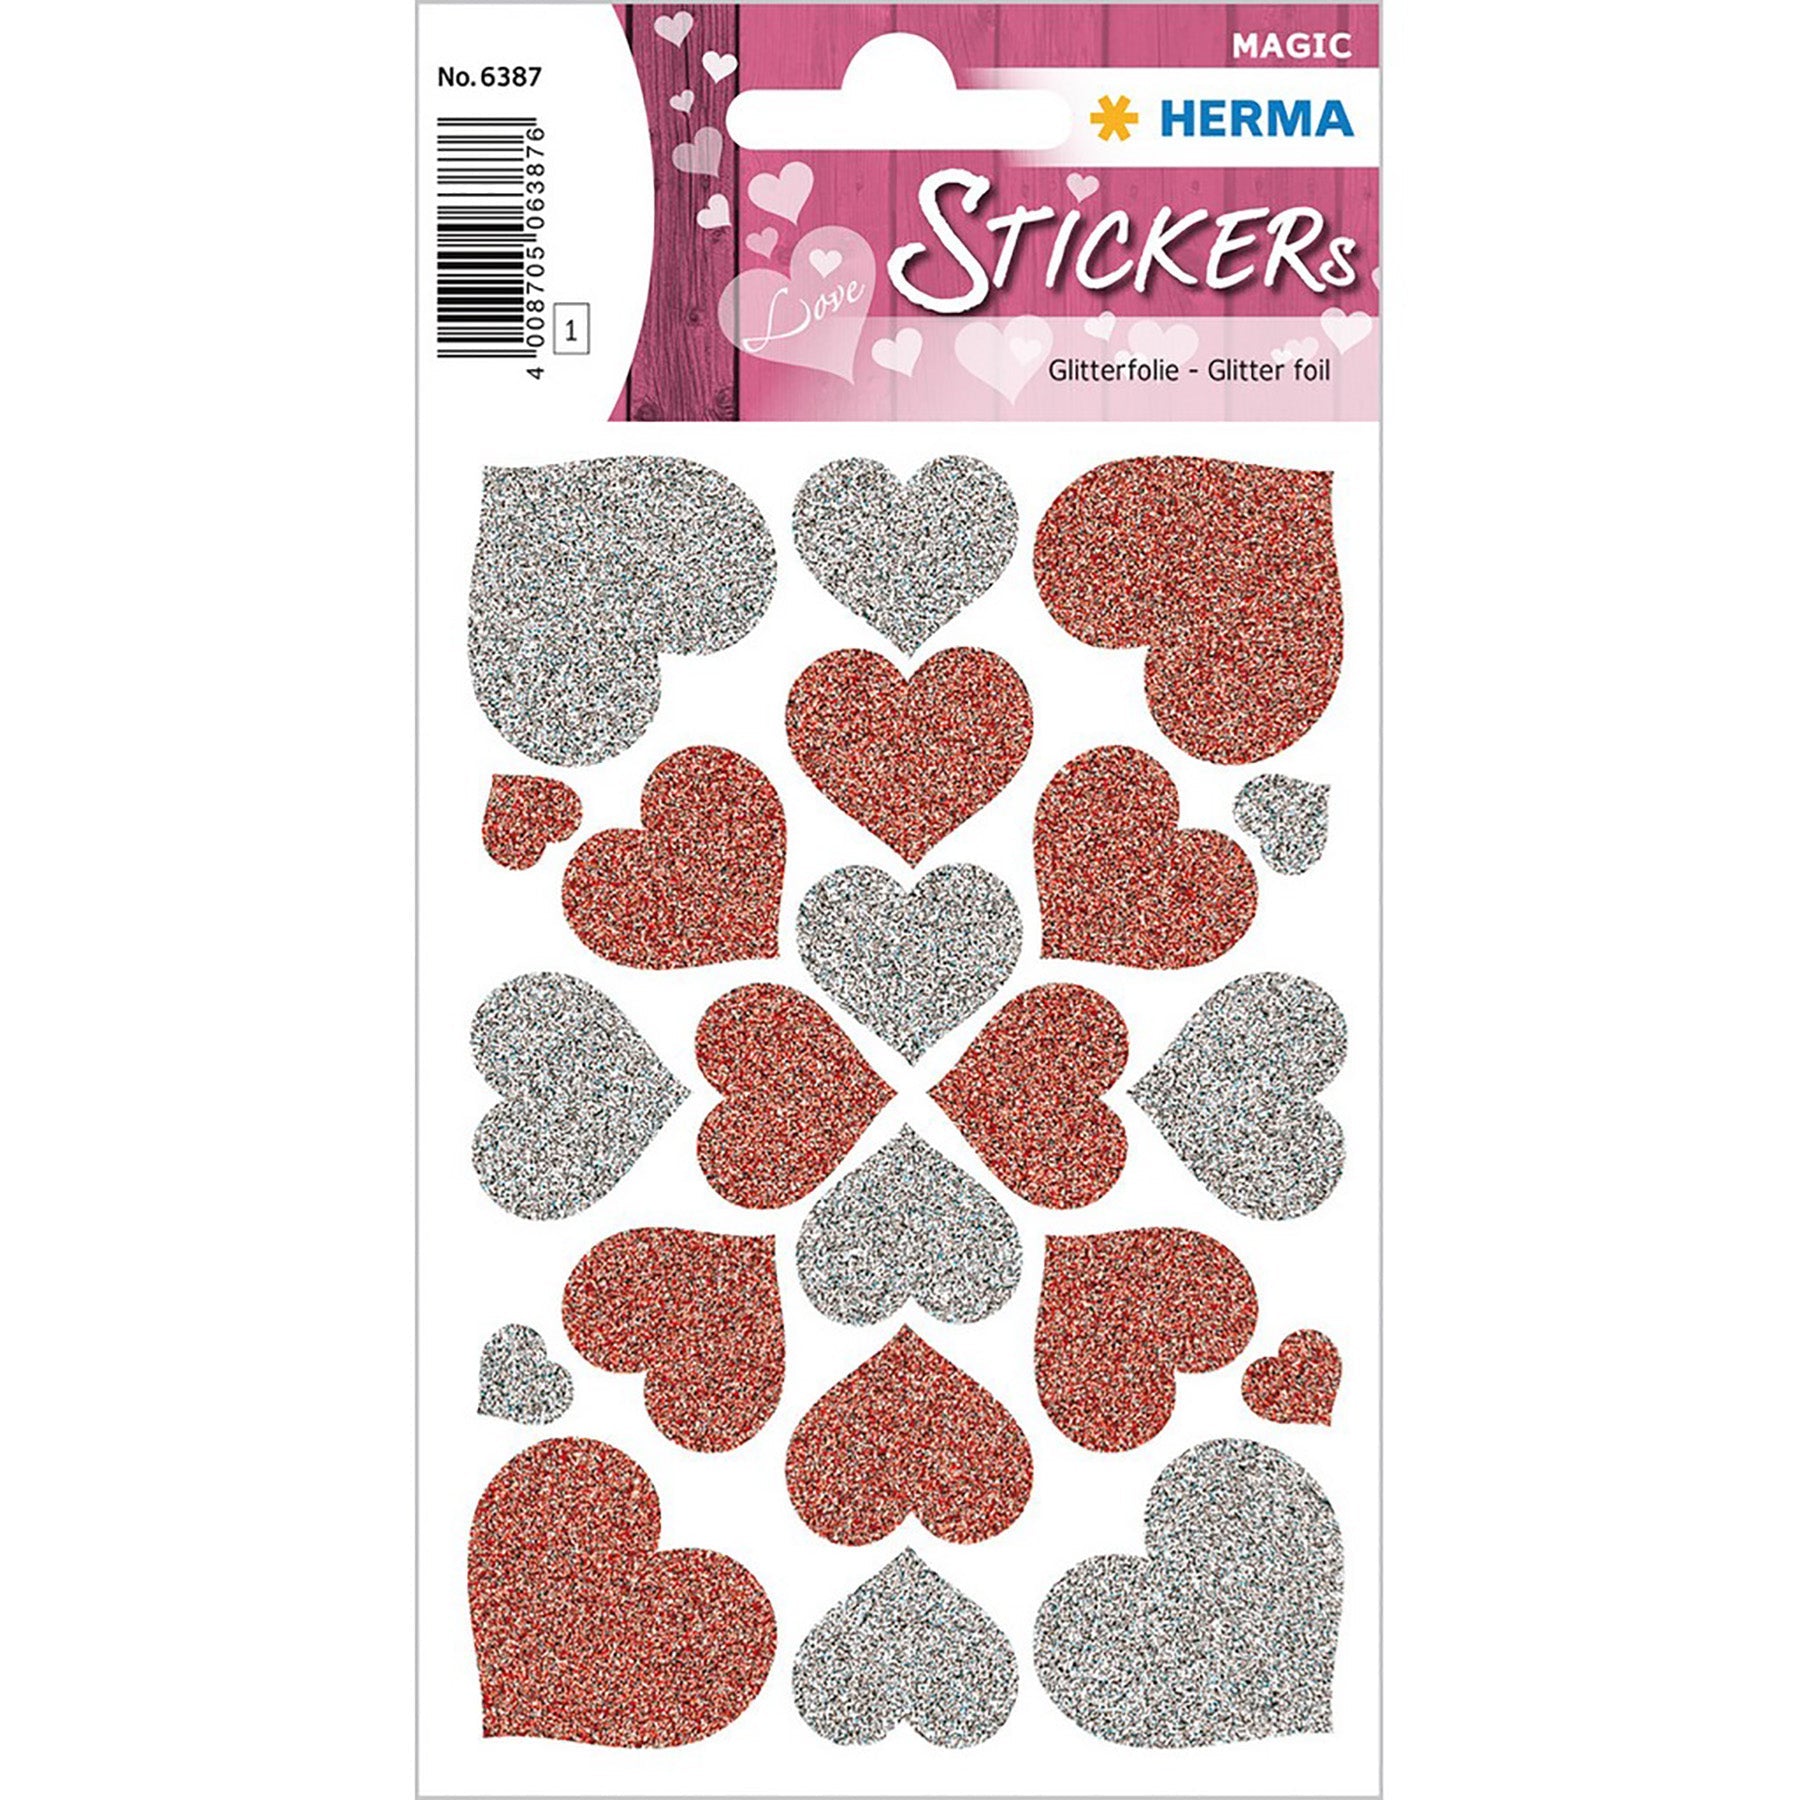 Herma Magic Stickers Hearts Red and Silver Glittery 4.75x3.1in Sheet